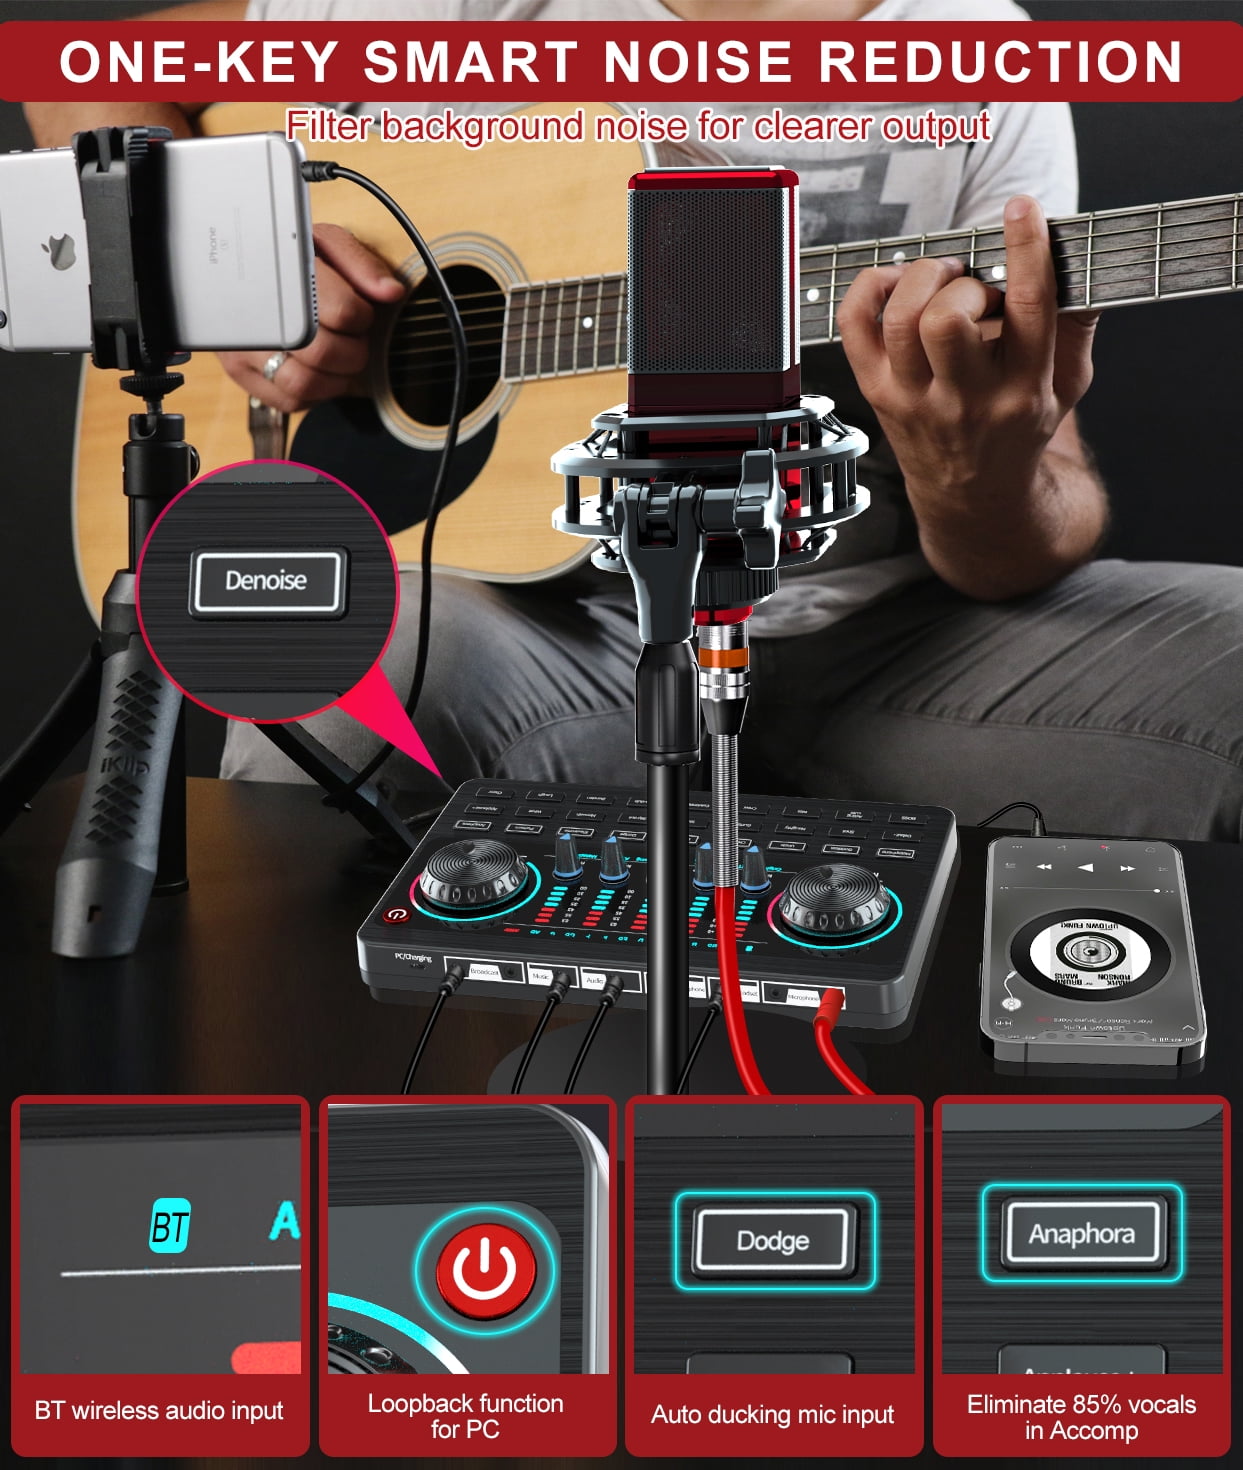 Podcast Equipment Bundle, tenlamp Audio Mixer with Live Sound Card and L12  Podcast Microphone Bundle, All-In-One Podcast Kit for PC or Cellphone Live  Streaming, Music Studio Recording, Guitar 